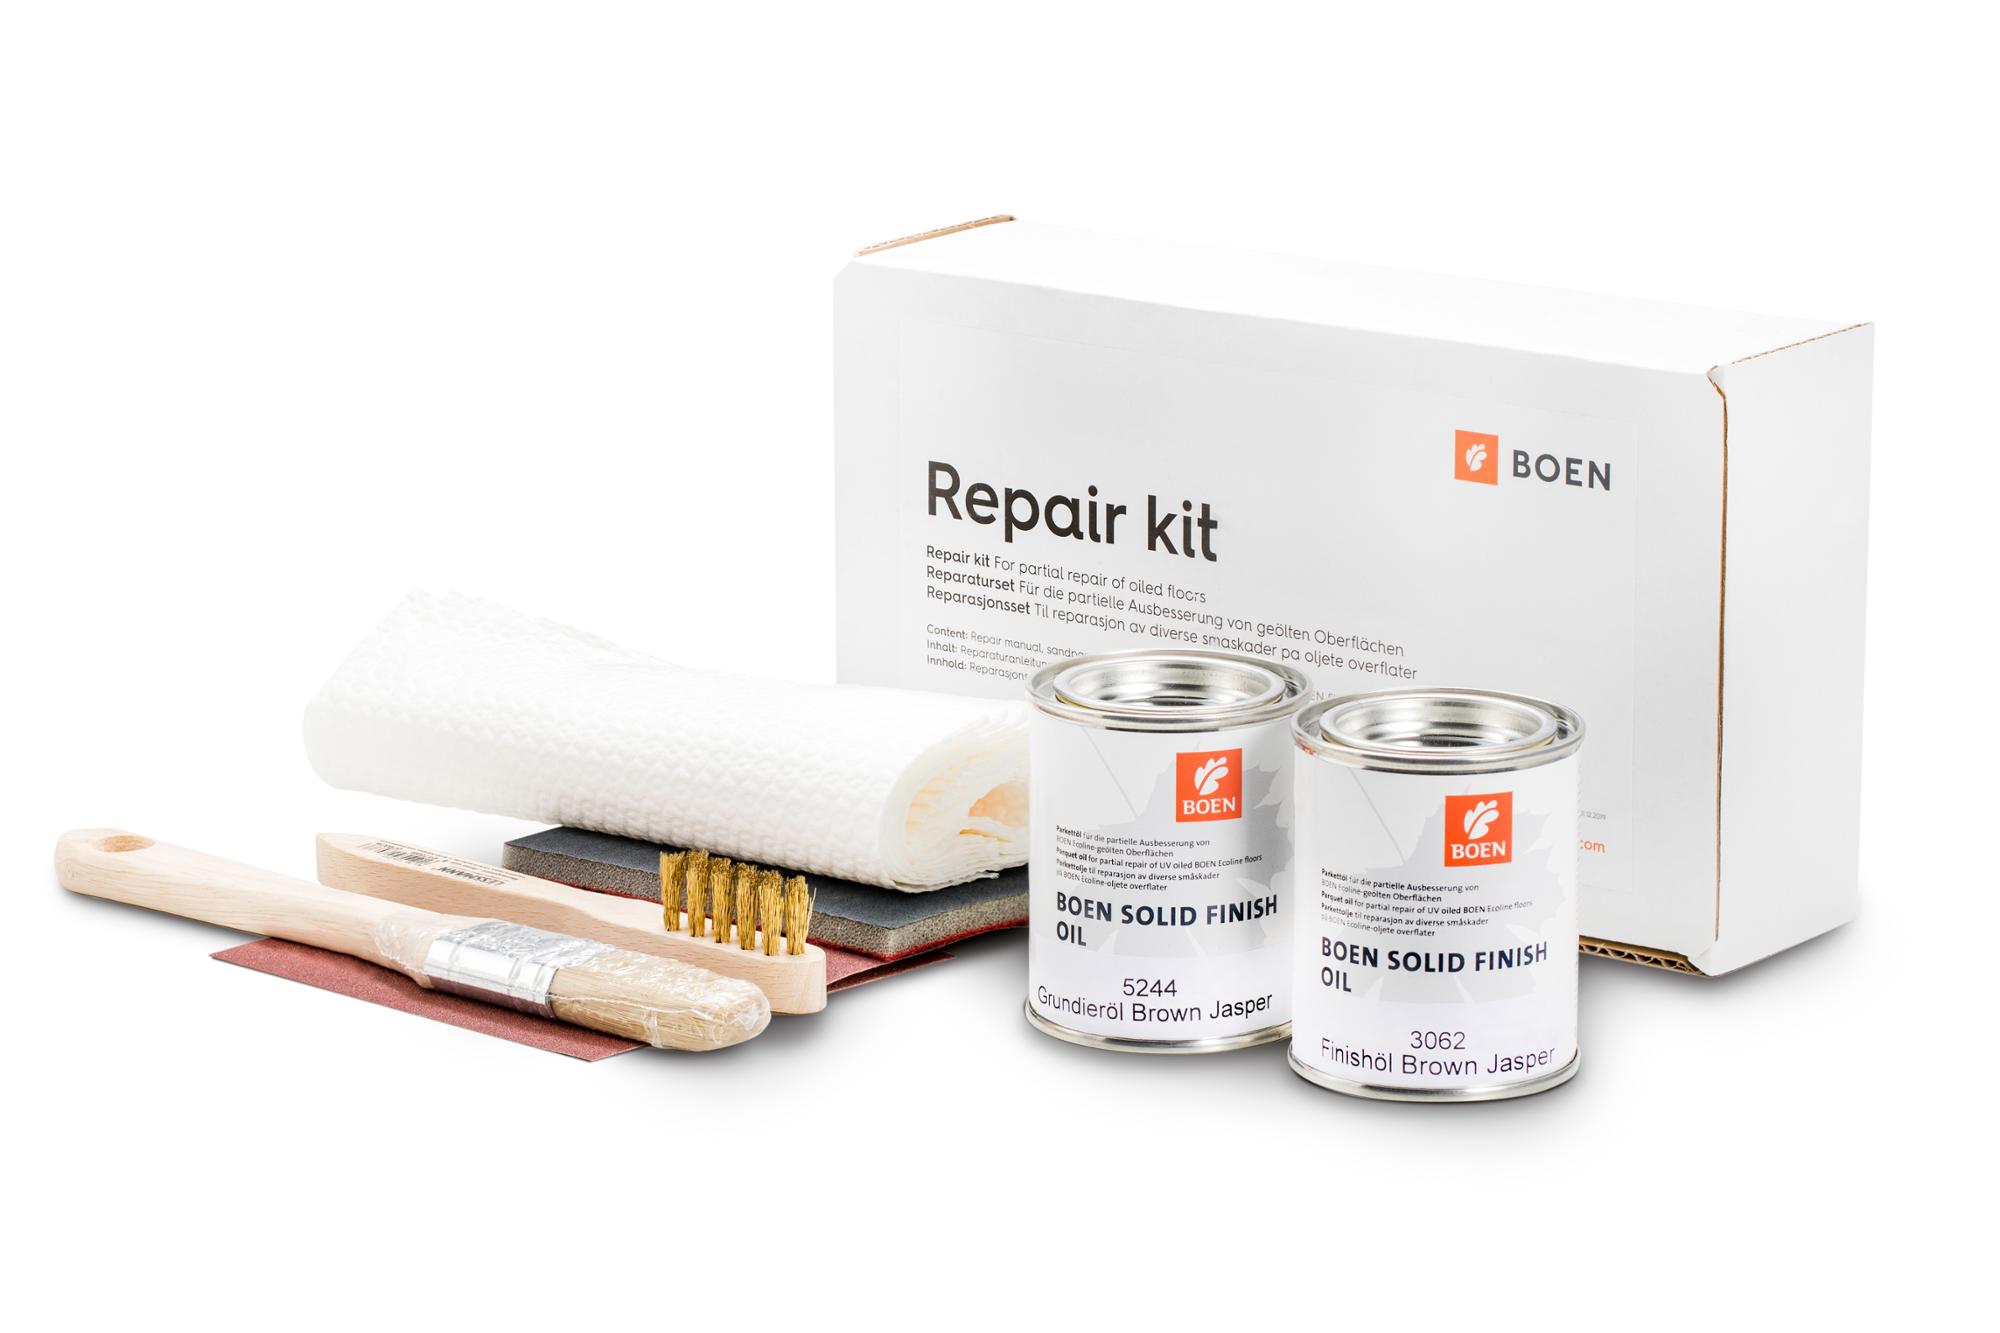 BOEN kit riparazione per Rovere Brown Jasper

For the partial repair of natural oiled surfaces.
Content: Repair instruction, abrasive paper P 150,
abrasive web P 360, 0,125 l BOEN Live Natural Oil,
paint brush, cleaning cloths.